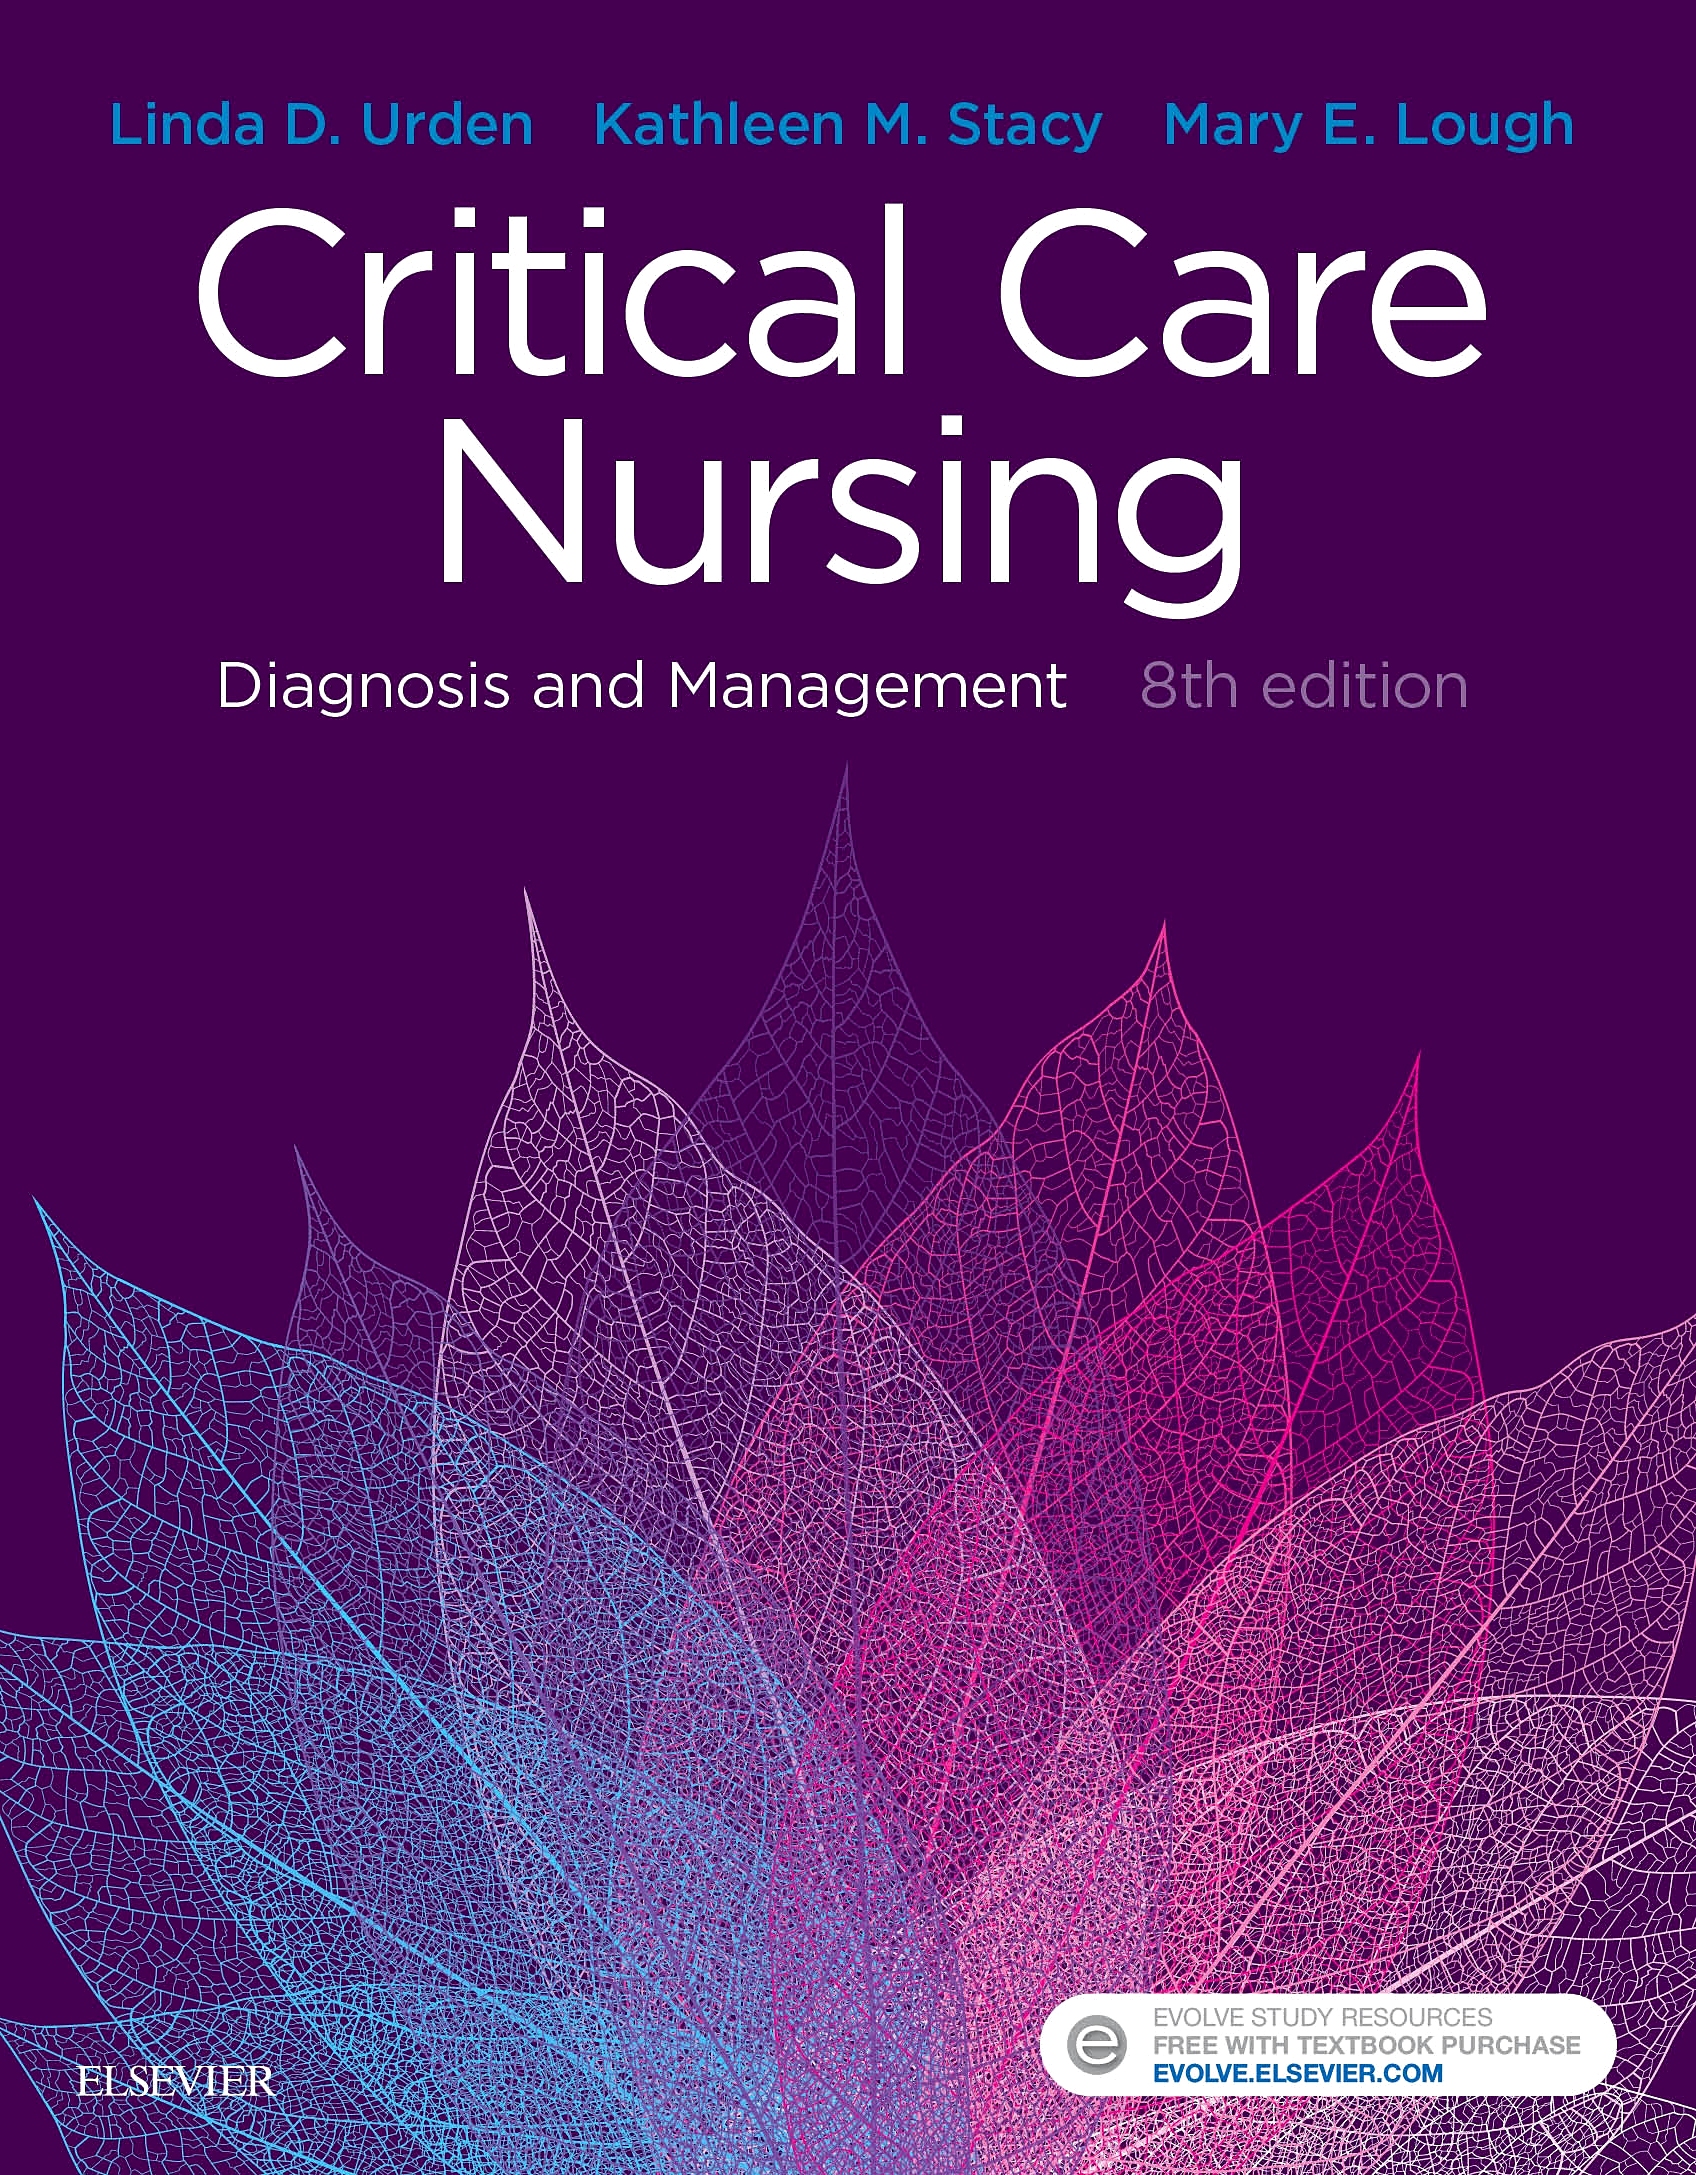 Evolve Resources for Critical Care Nursing, 8th Edition